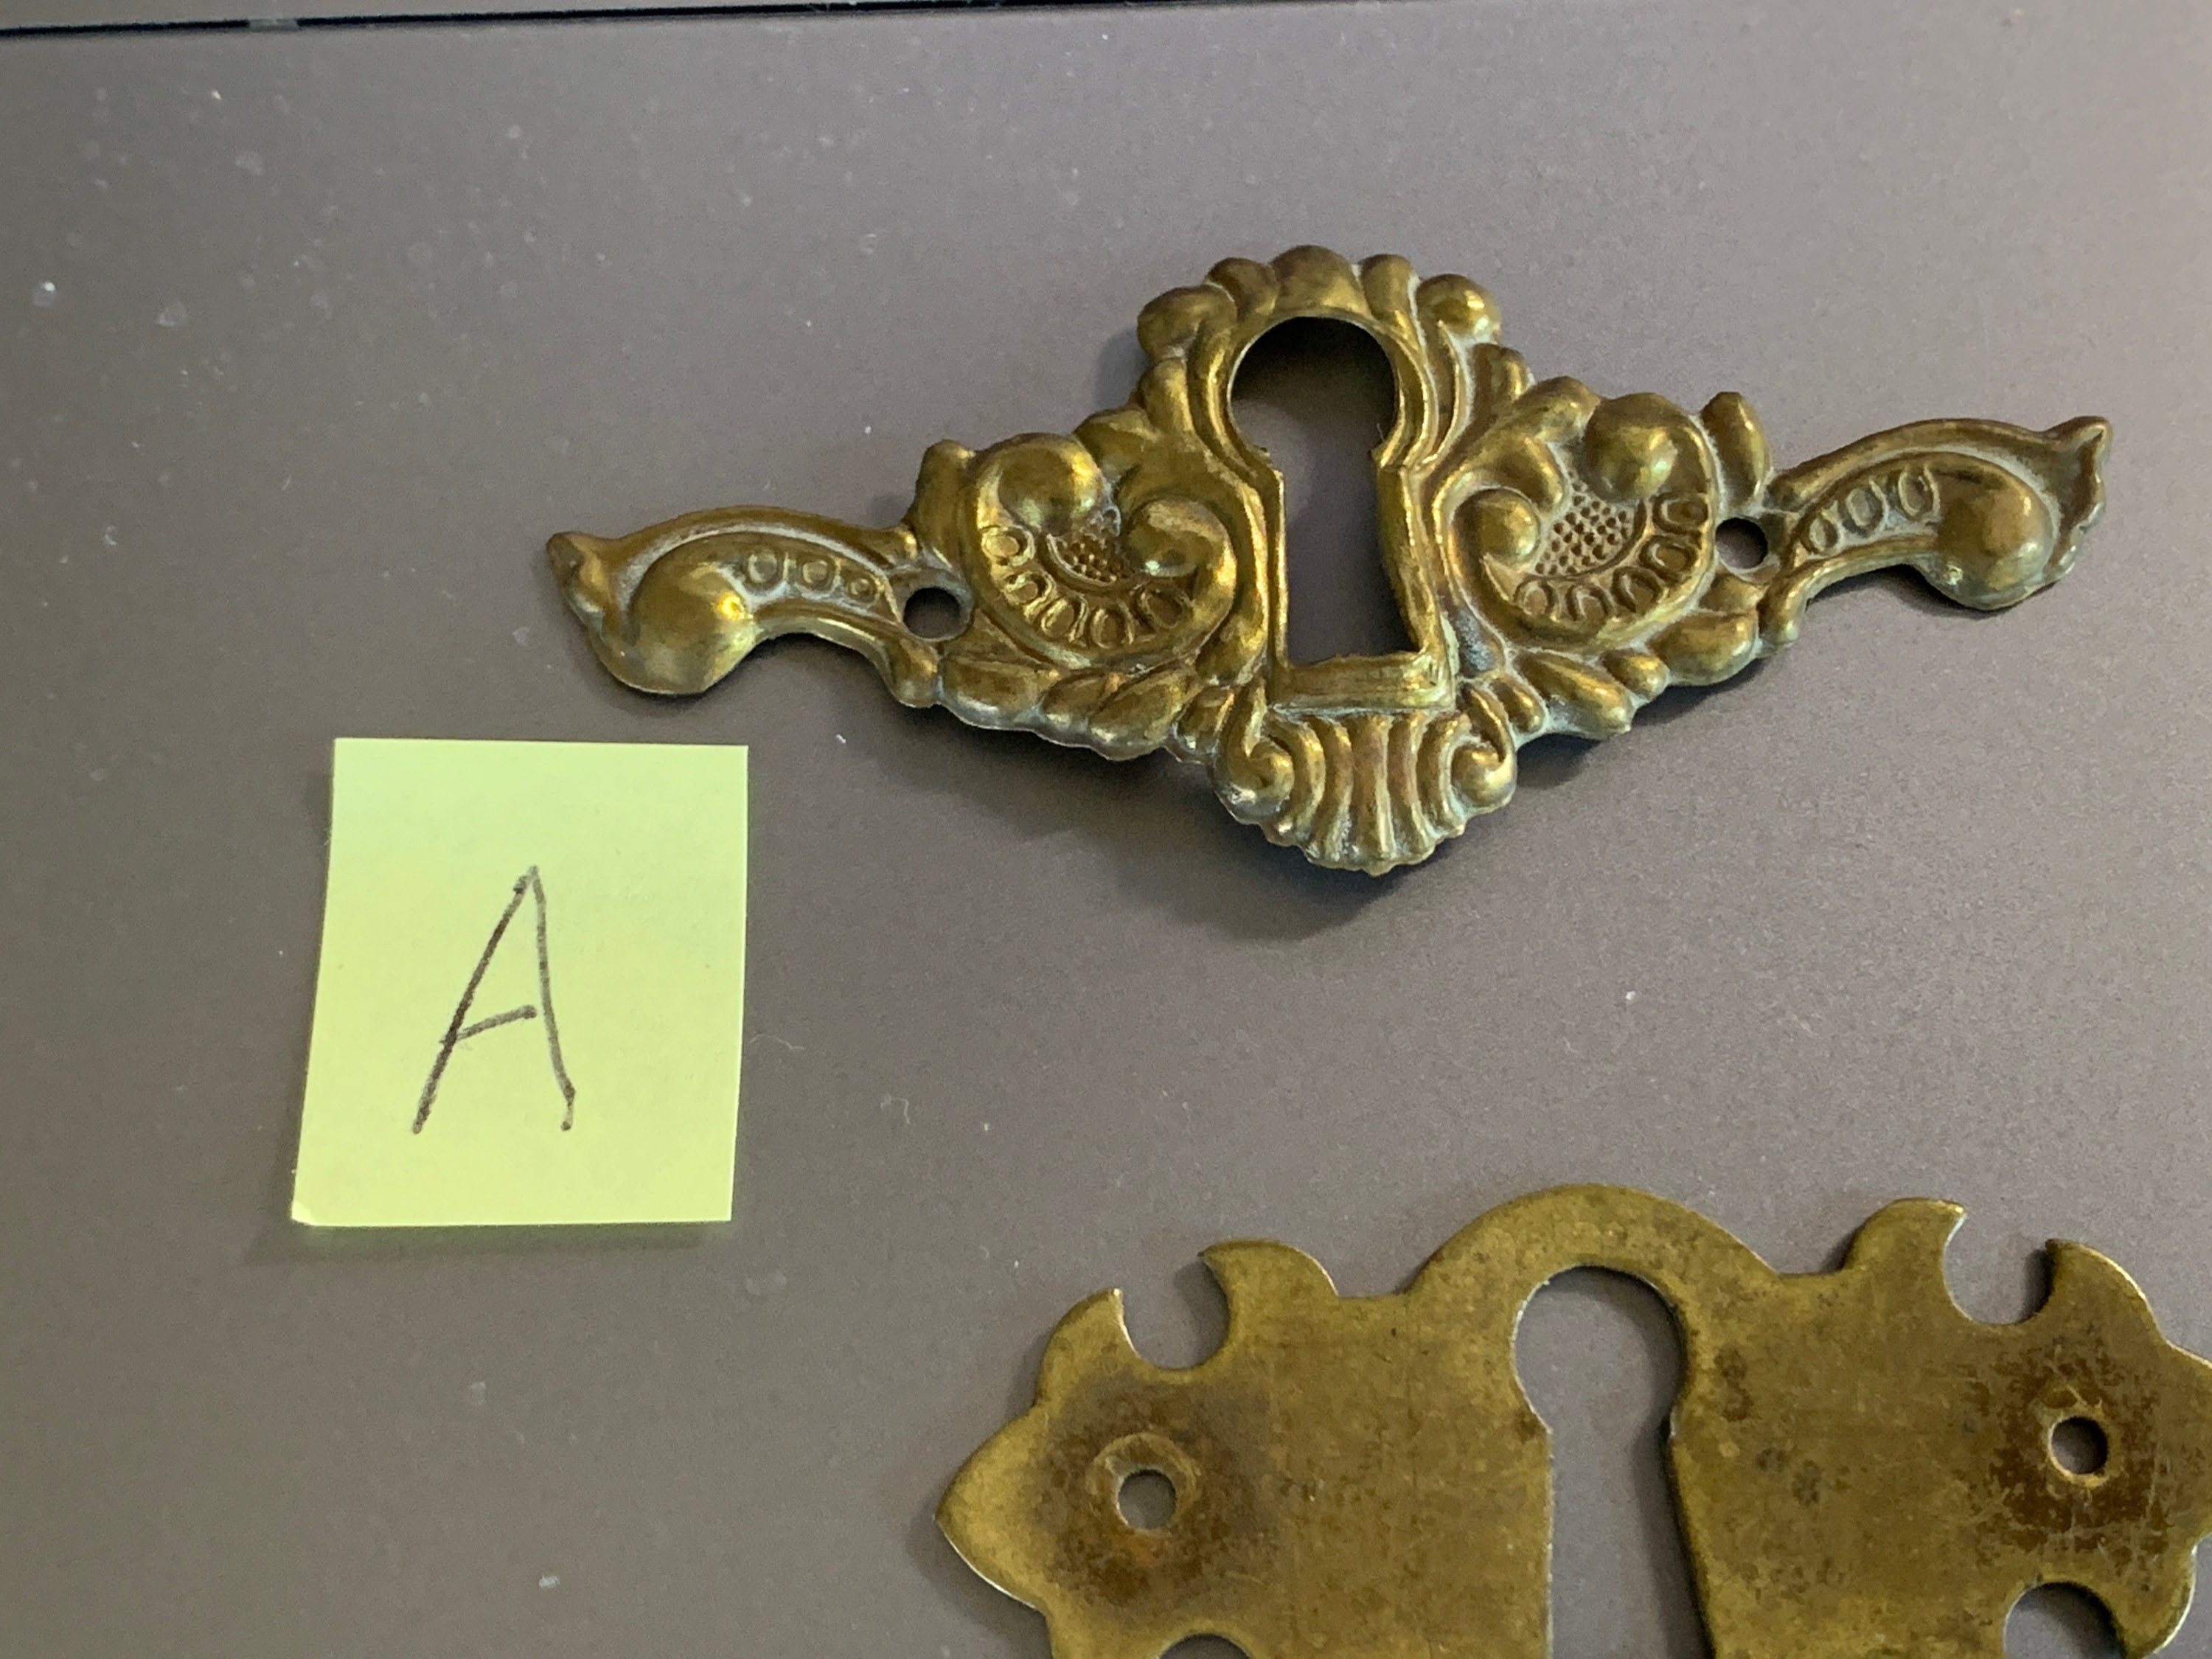 Details about   Vintage Solid Brass Escutcheons Lot of 5 Key Hole Cover Drawer Cabinet Door #35 